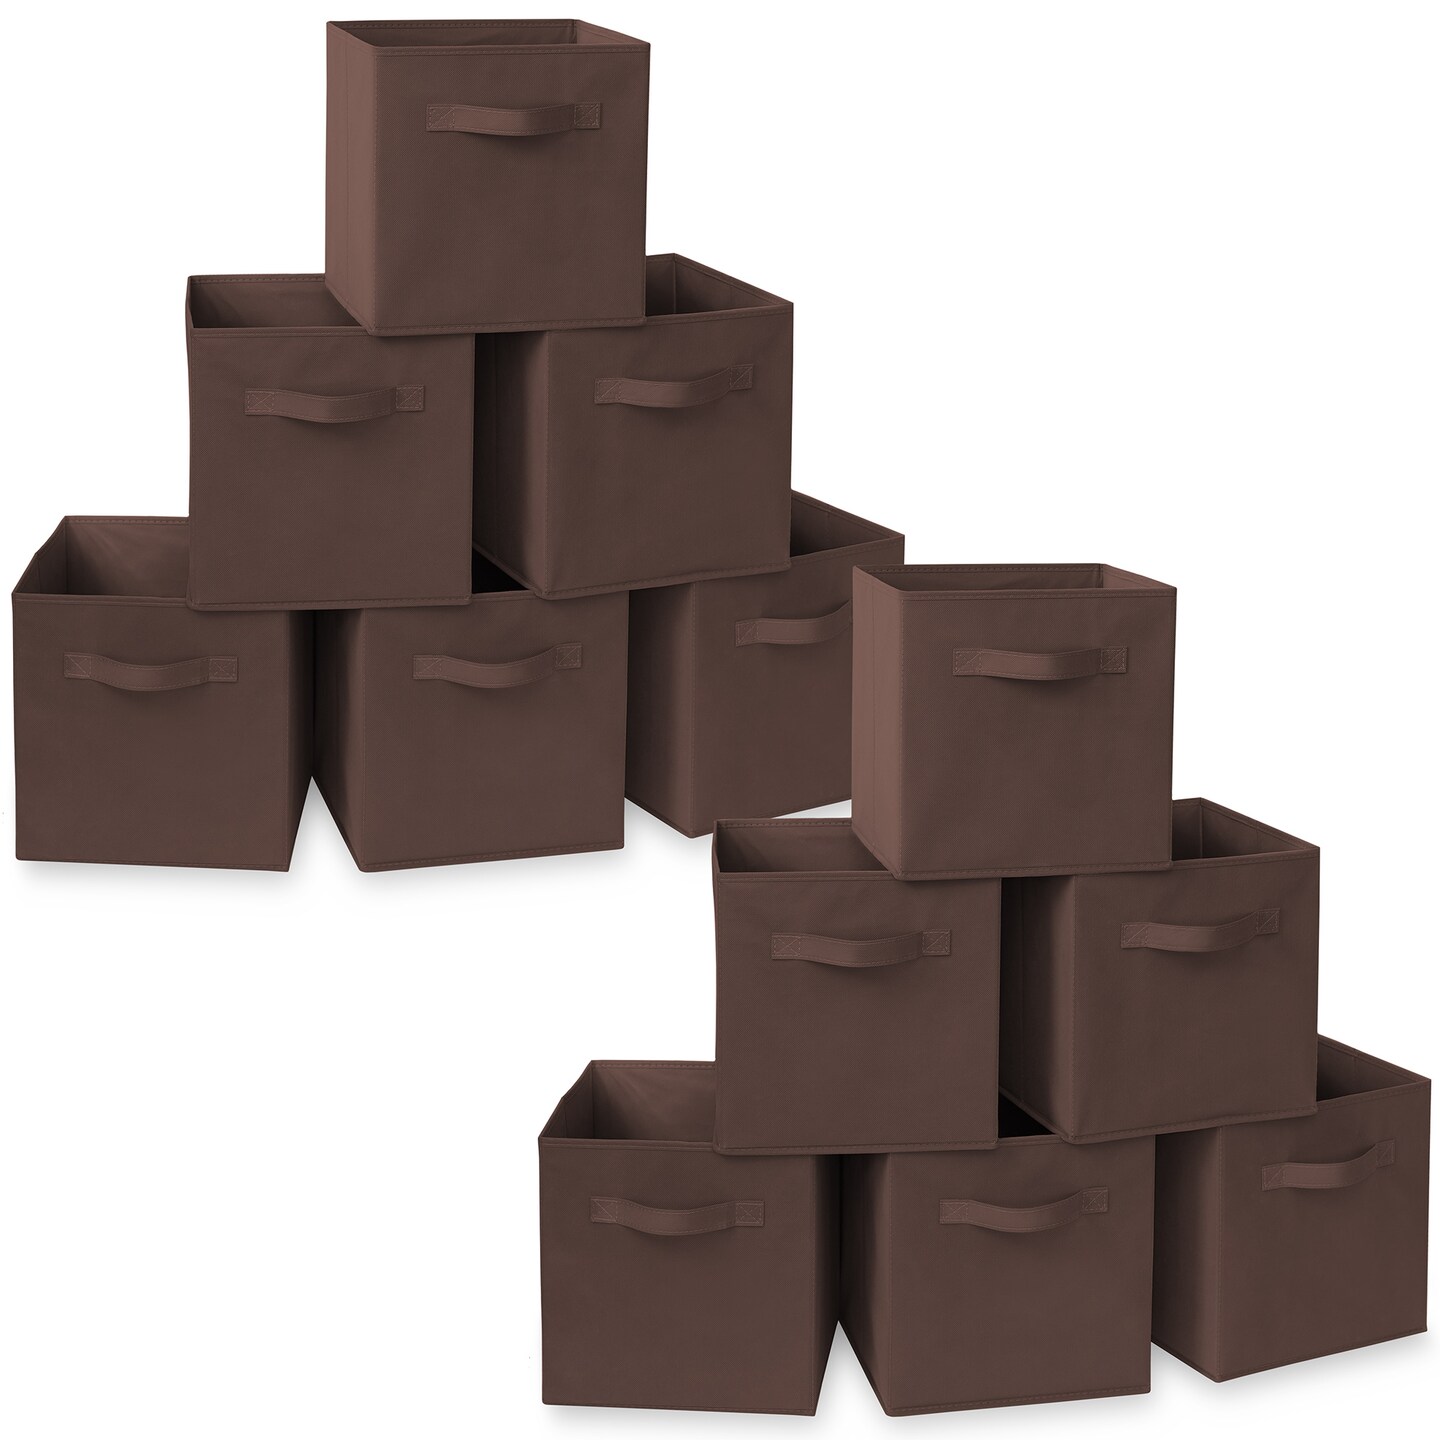 Casafield Set of 12 Collapsible Fabric Cube Storage Bins - Foldable Cloth Baskets for Shelves, Cubby Organizers & More